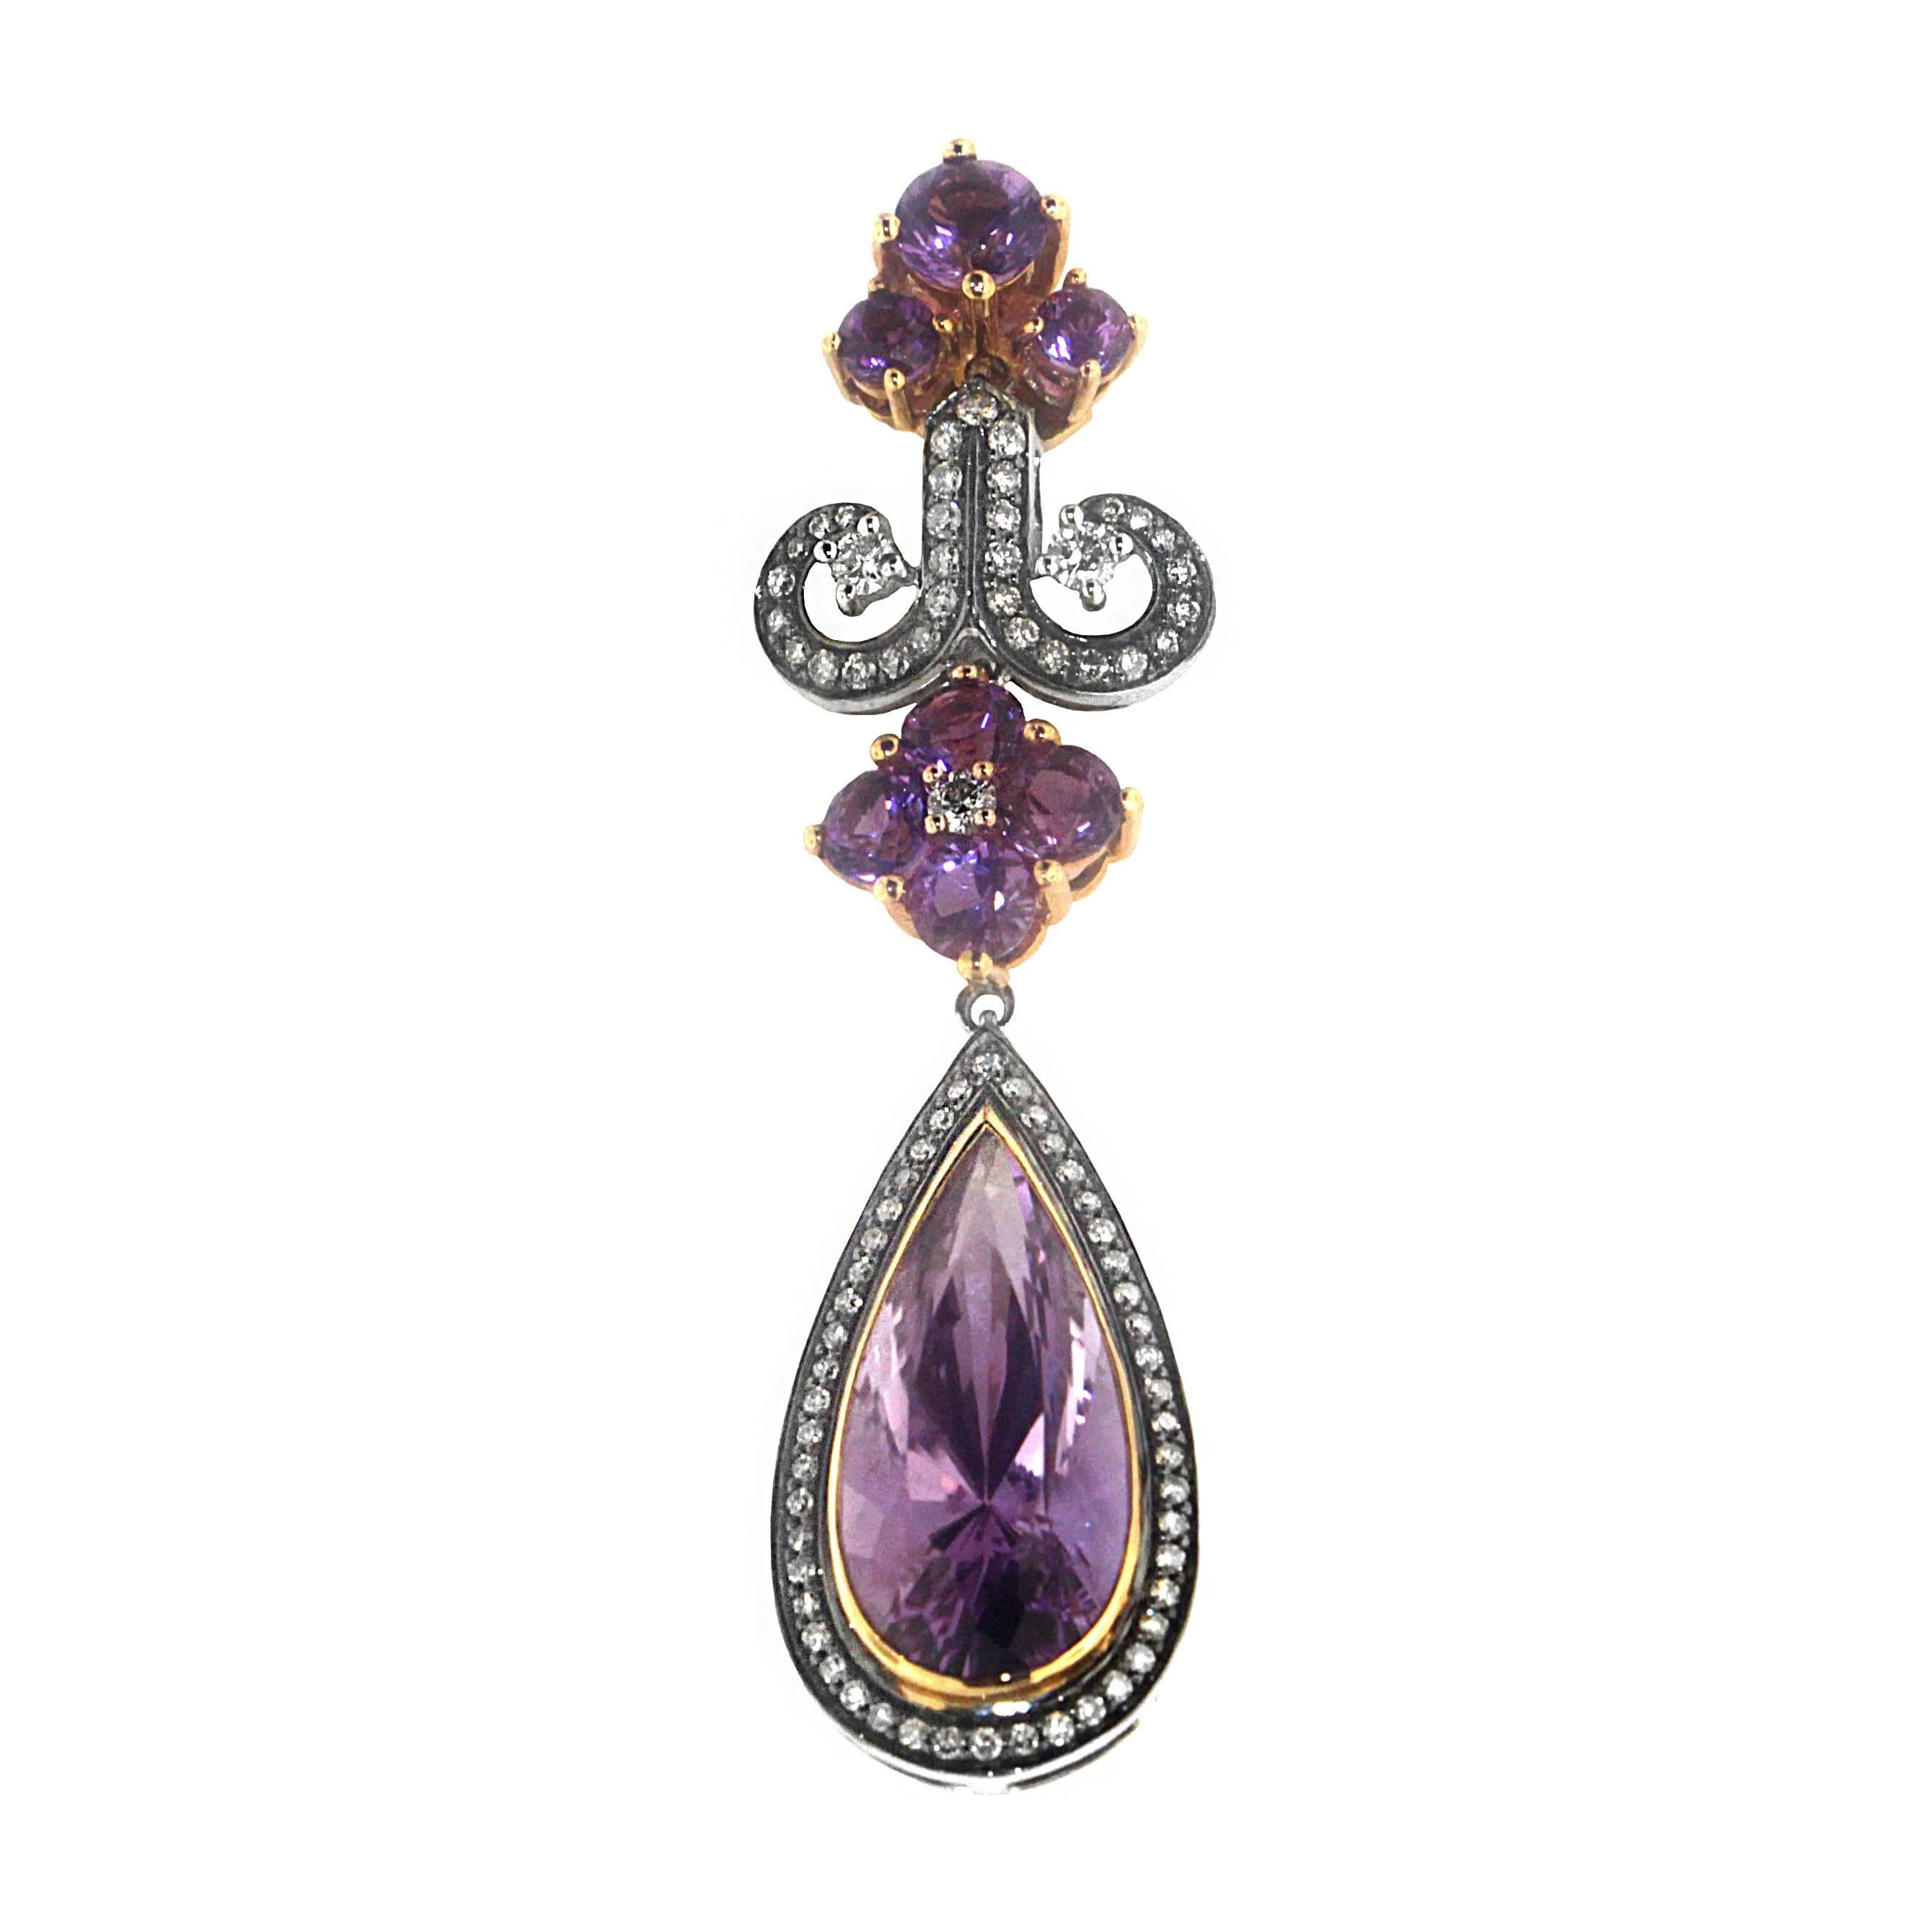 A triumph of symmetry and design, Zorab pays homage to the art of jewelry with this 20.20 Carat Amethyst Quartz dangling Chandelier earring featuring classic tear drop center stones set with 1.43 Carats of White Diamonds. 

This item has a serial